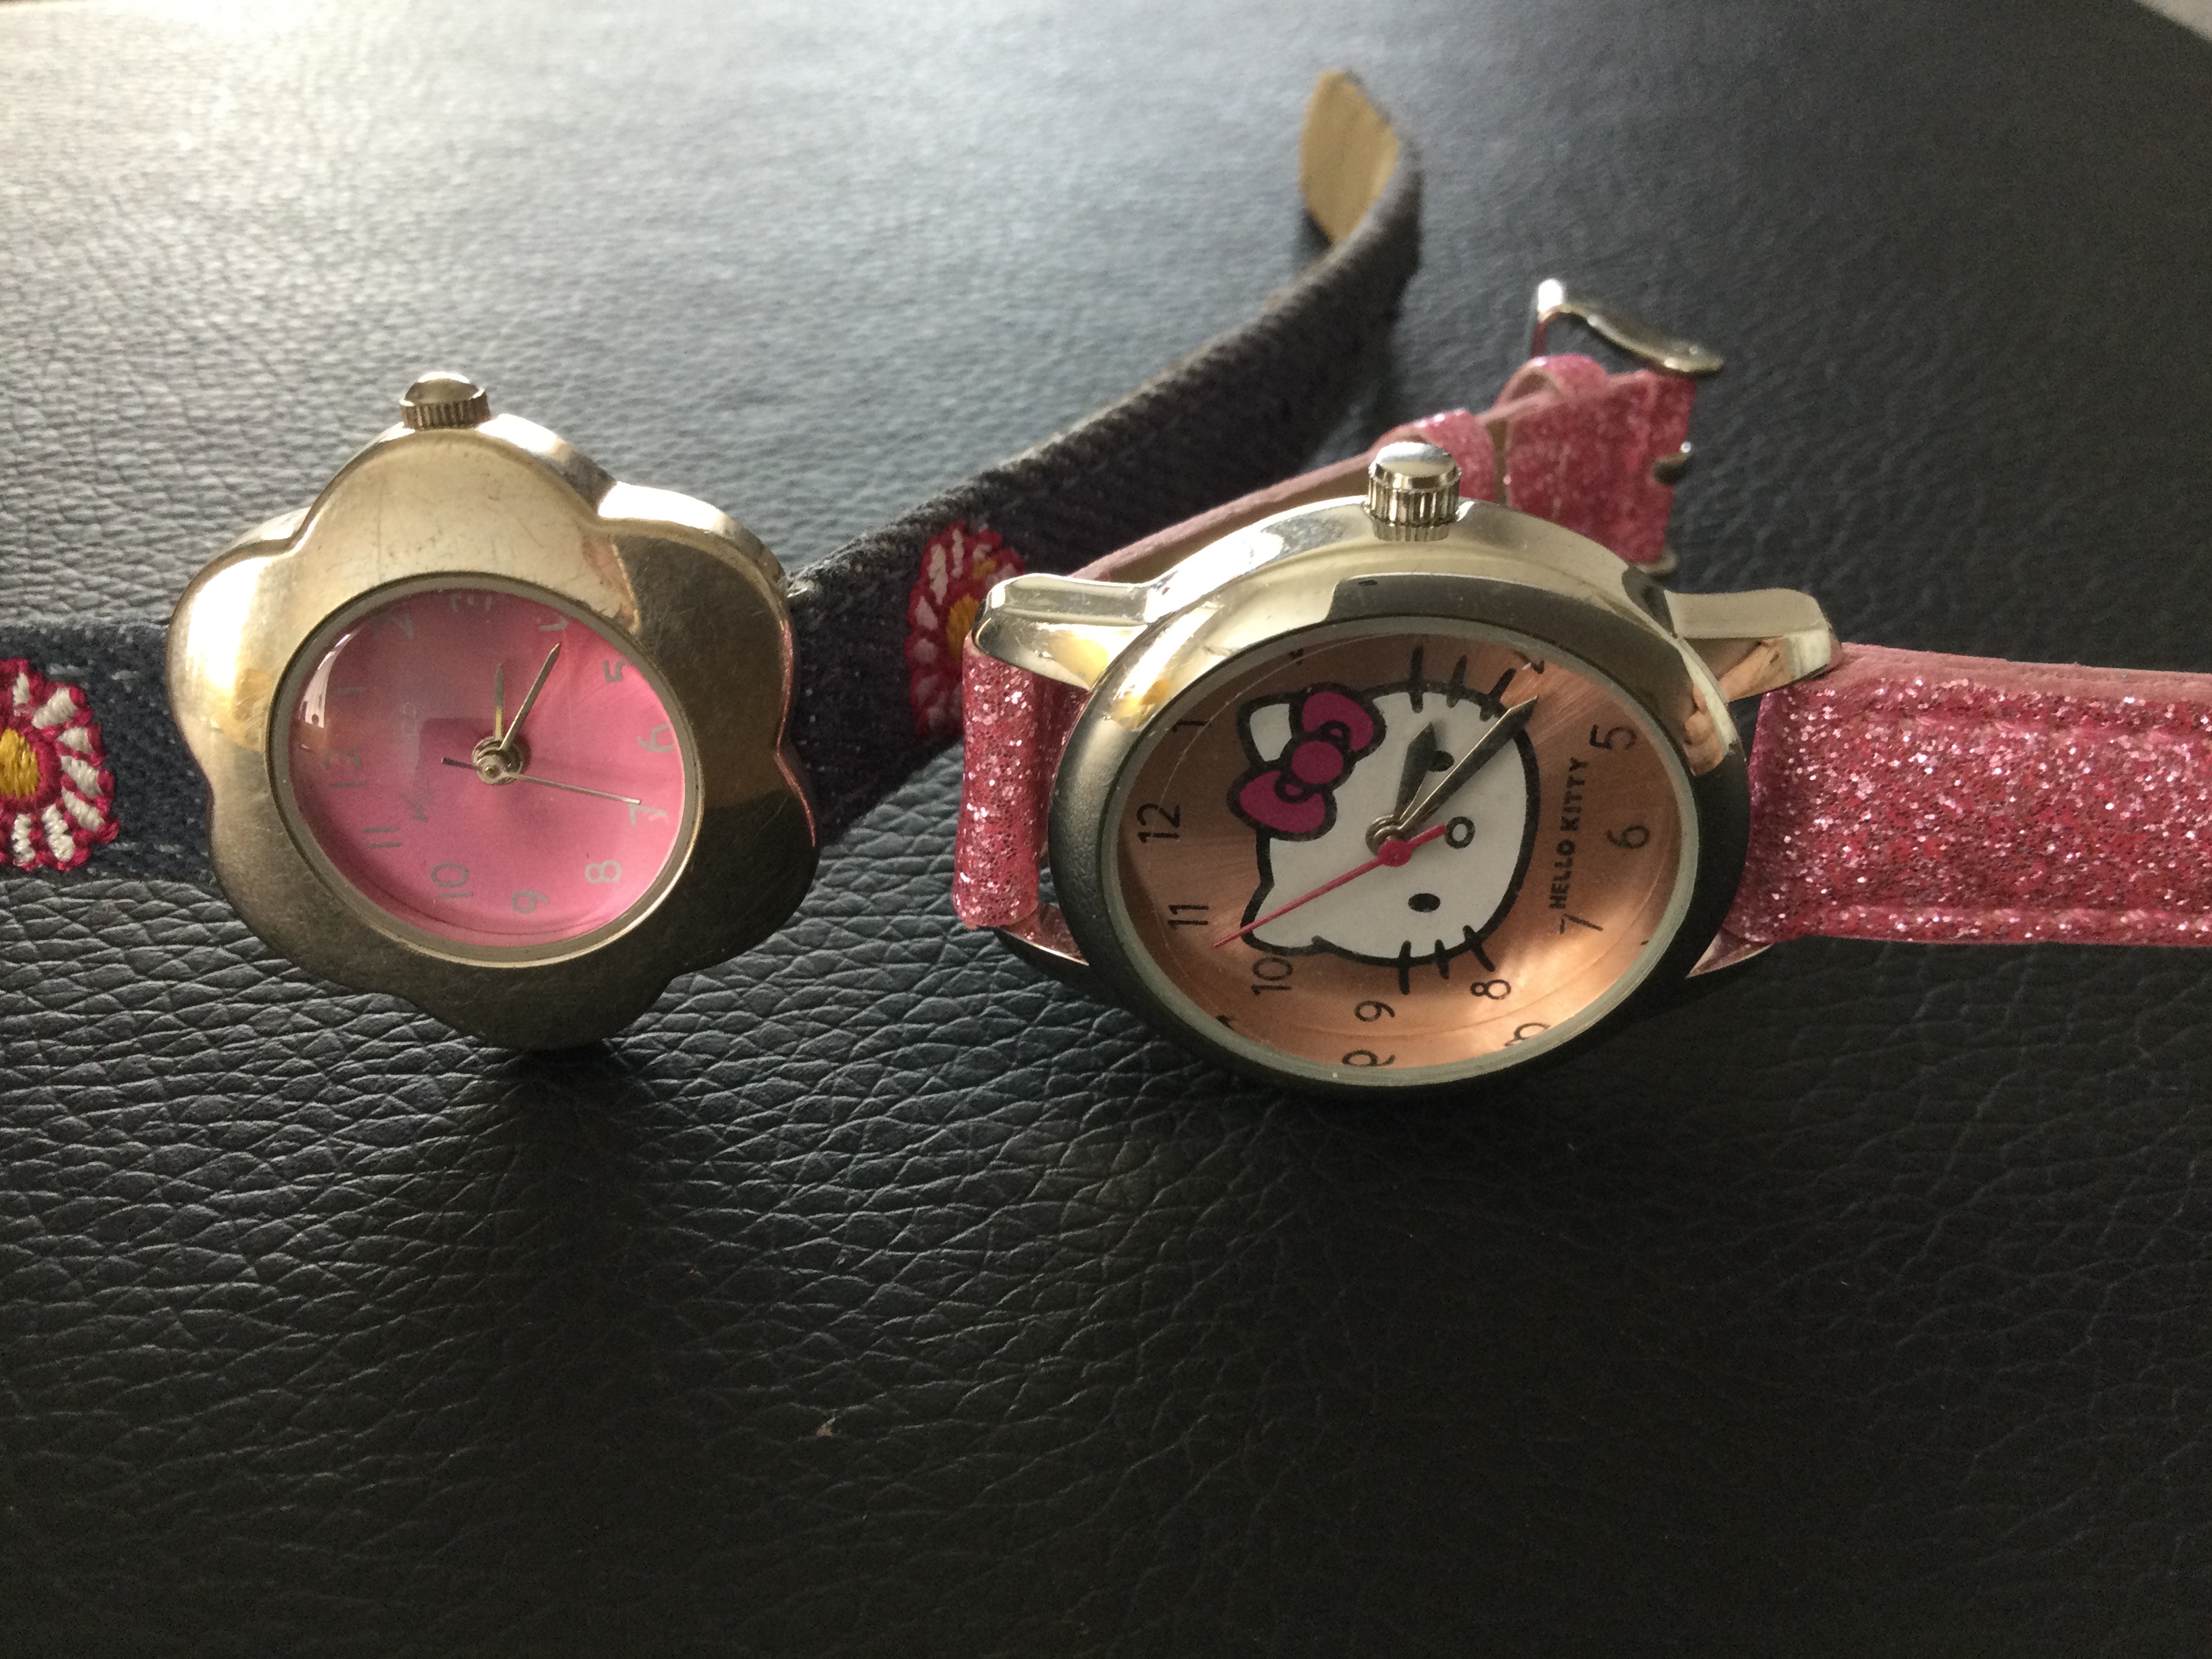 2x Little Sisters Hello Kitty Wristwatches (GS75) Two Little Sisters watches, both working - Image 3 of 4